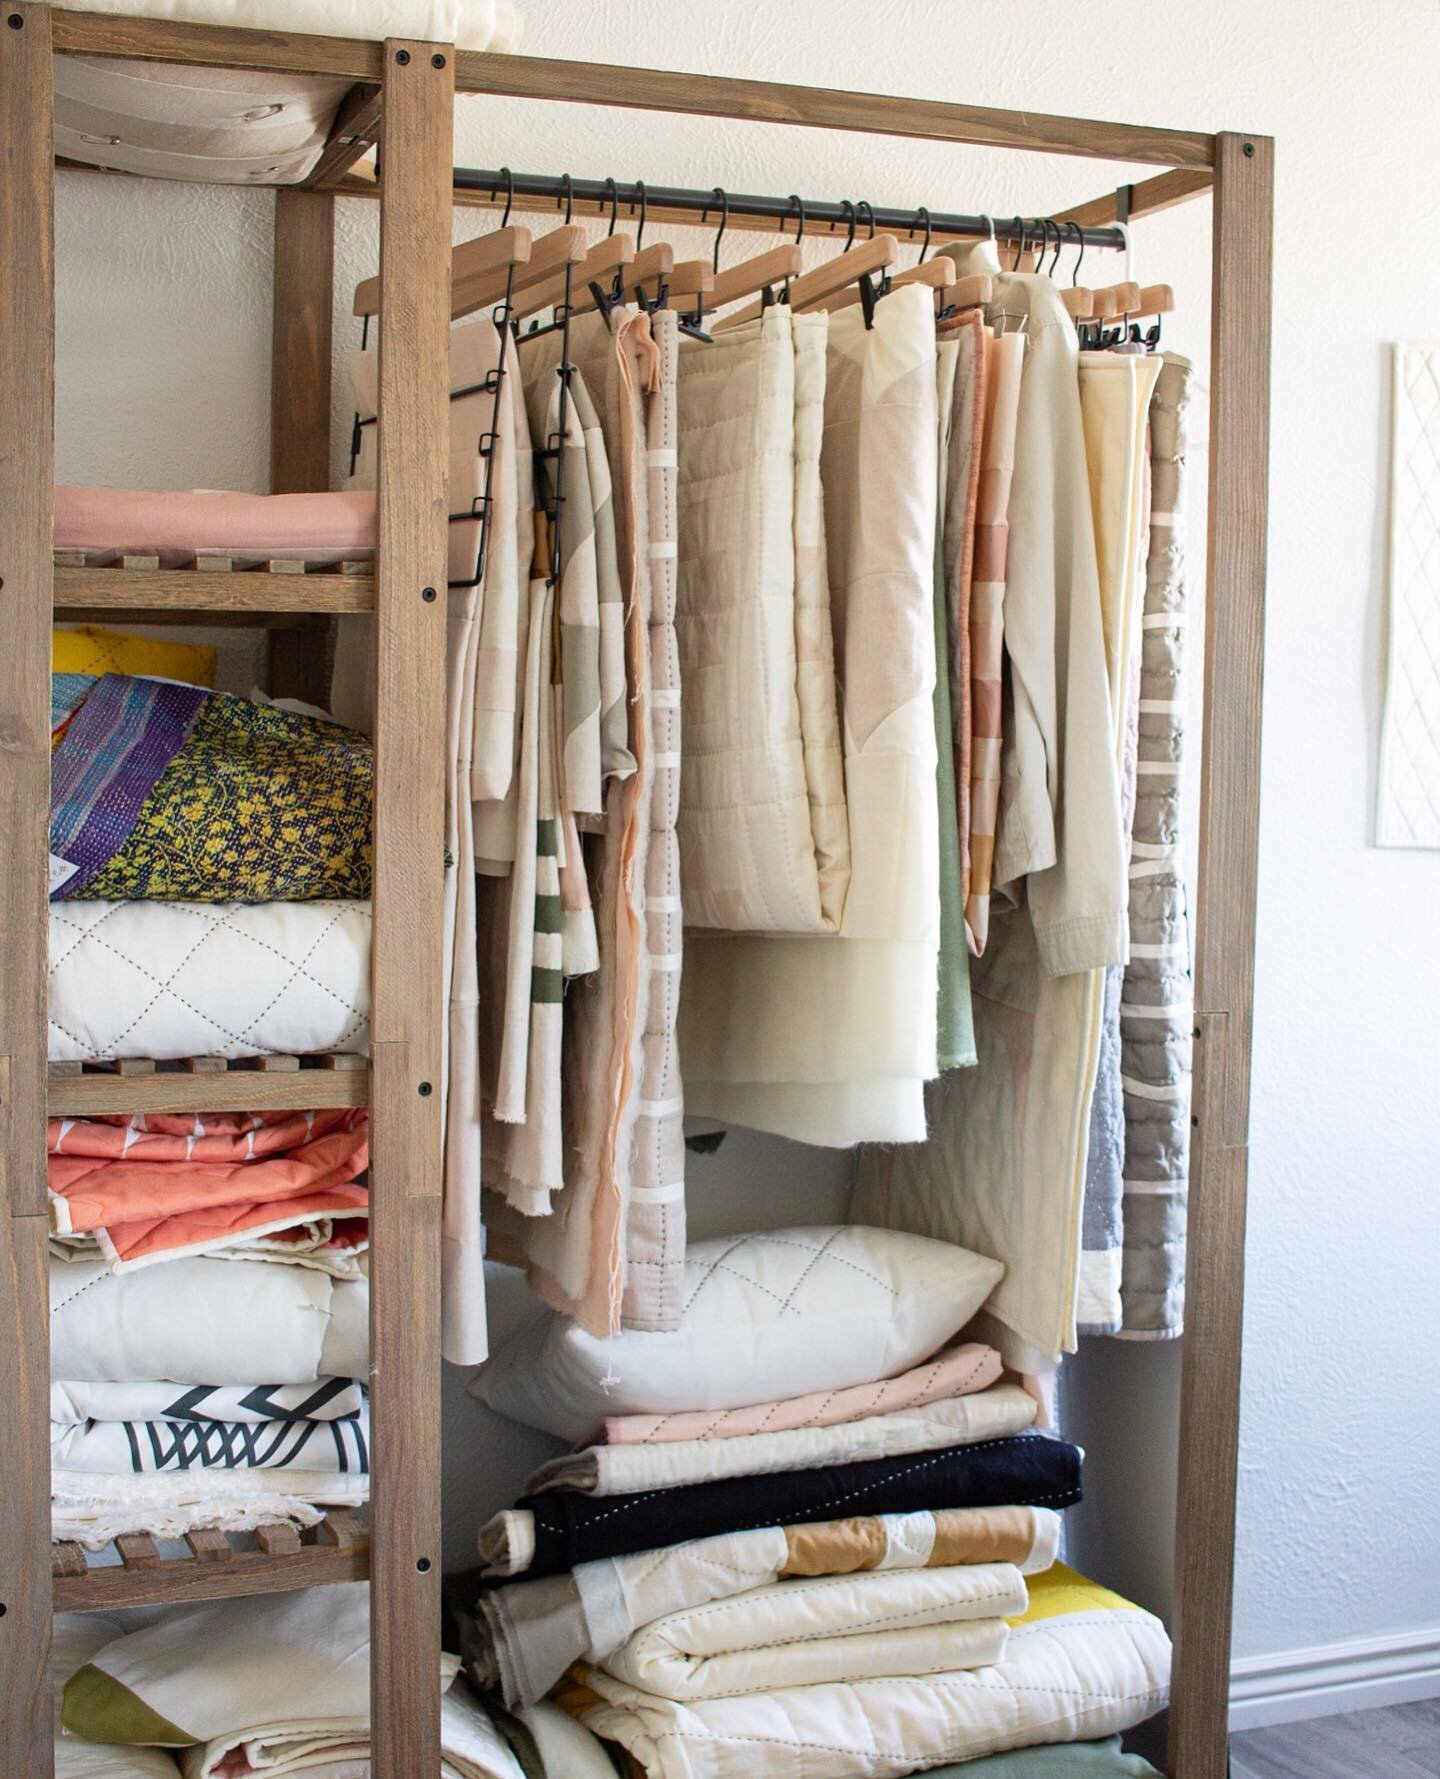 I'm sure this is not the best way to store quilts, but it's what is happening right now in my studio. I have been in this studio for a few months now, and after having lived in and used it for some time, I'm ready to make some changes.⁠
⁠
Do you chan